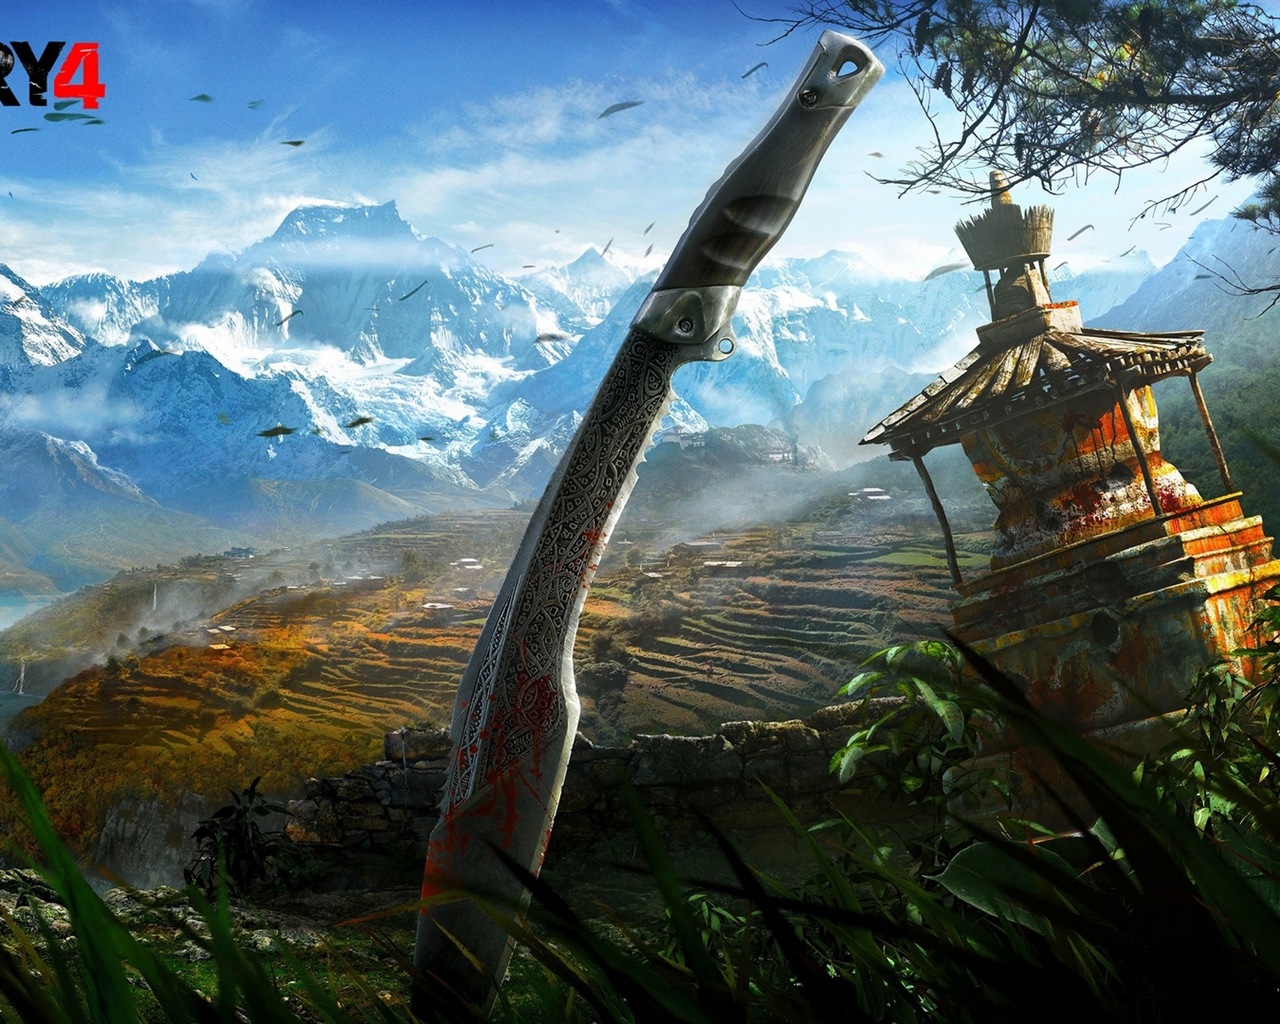 Far Cry 4 HD game wallpapers #1 - 1280x1024